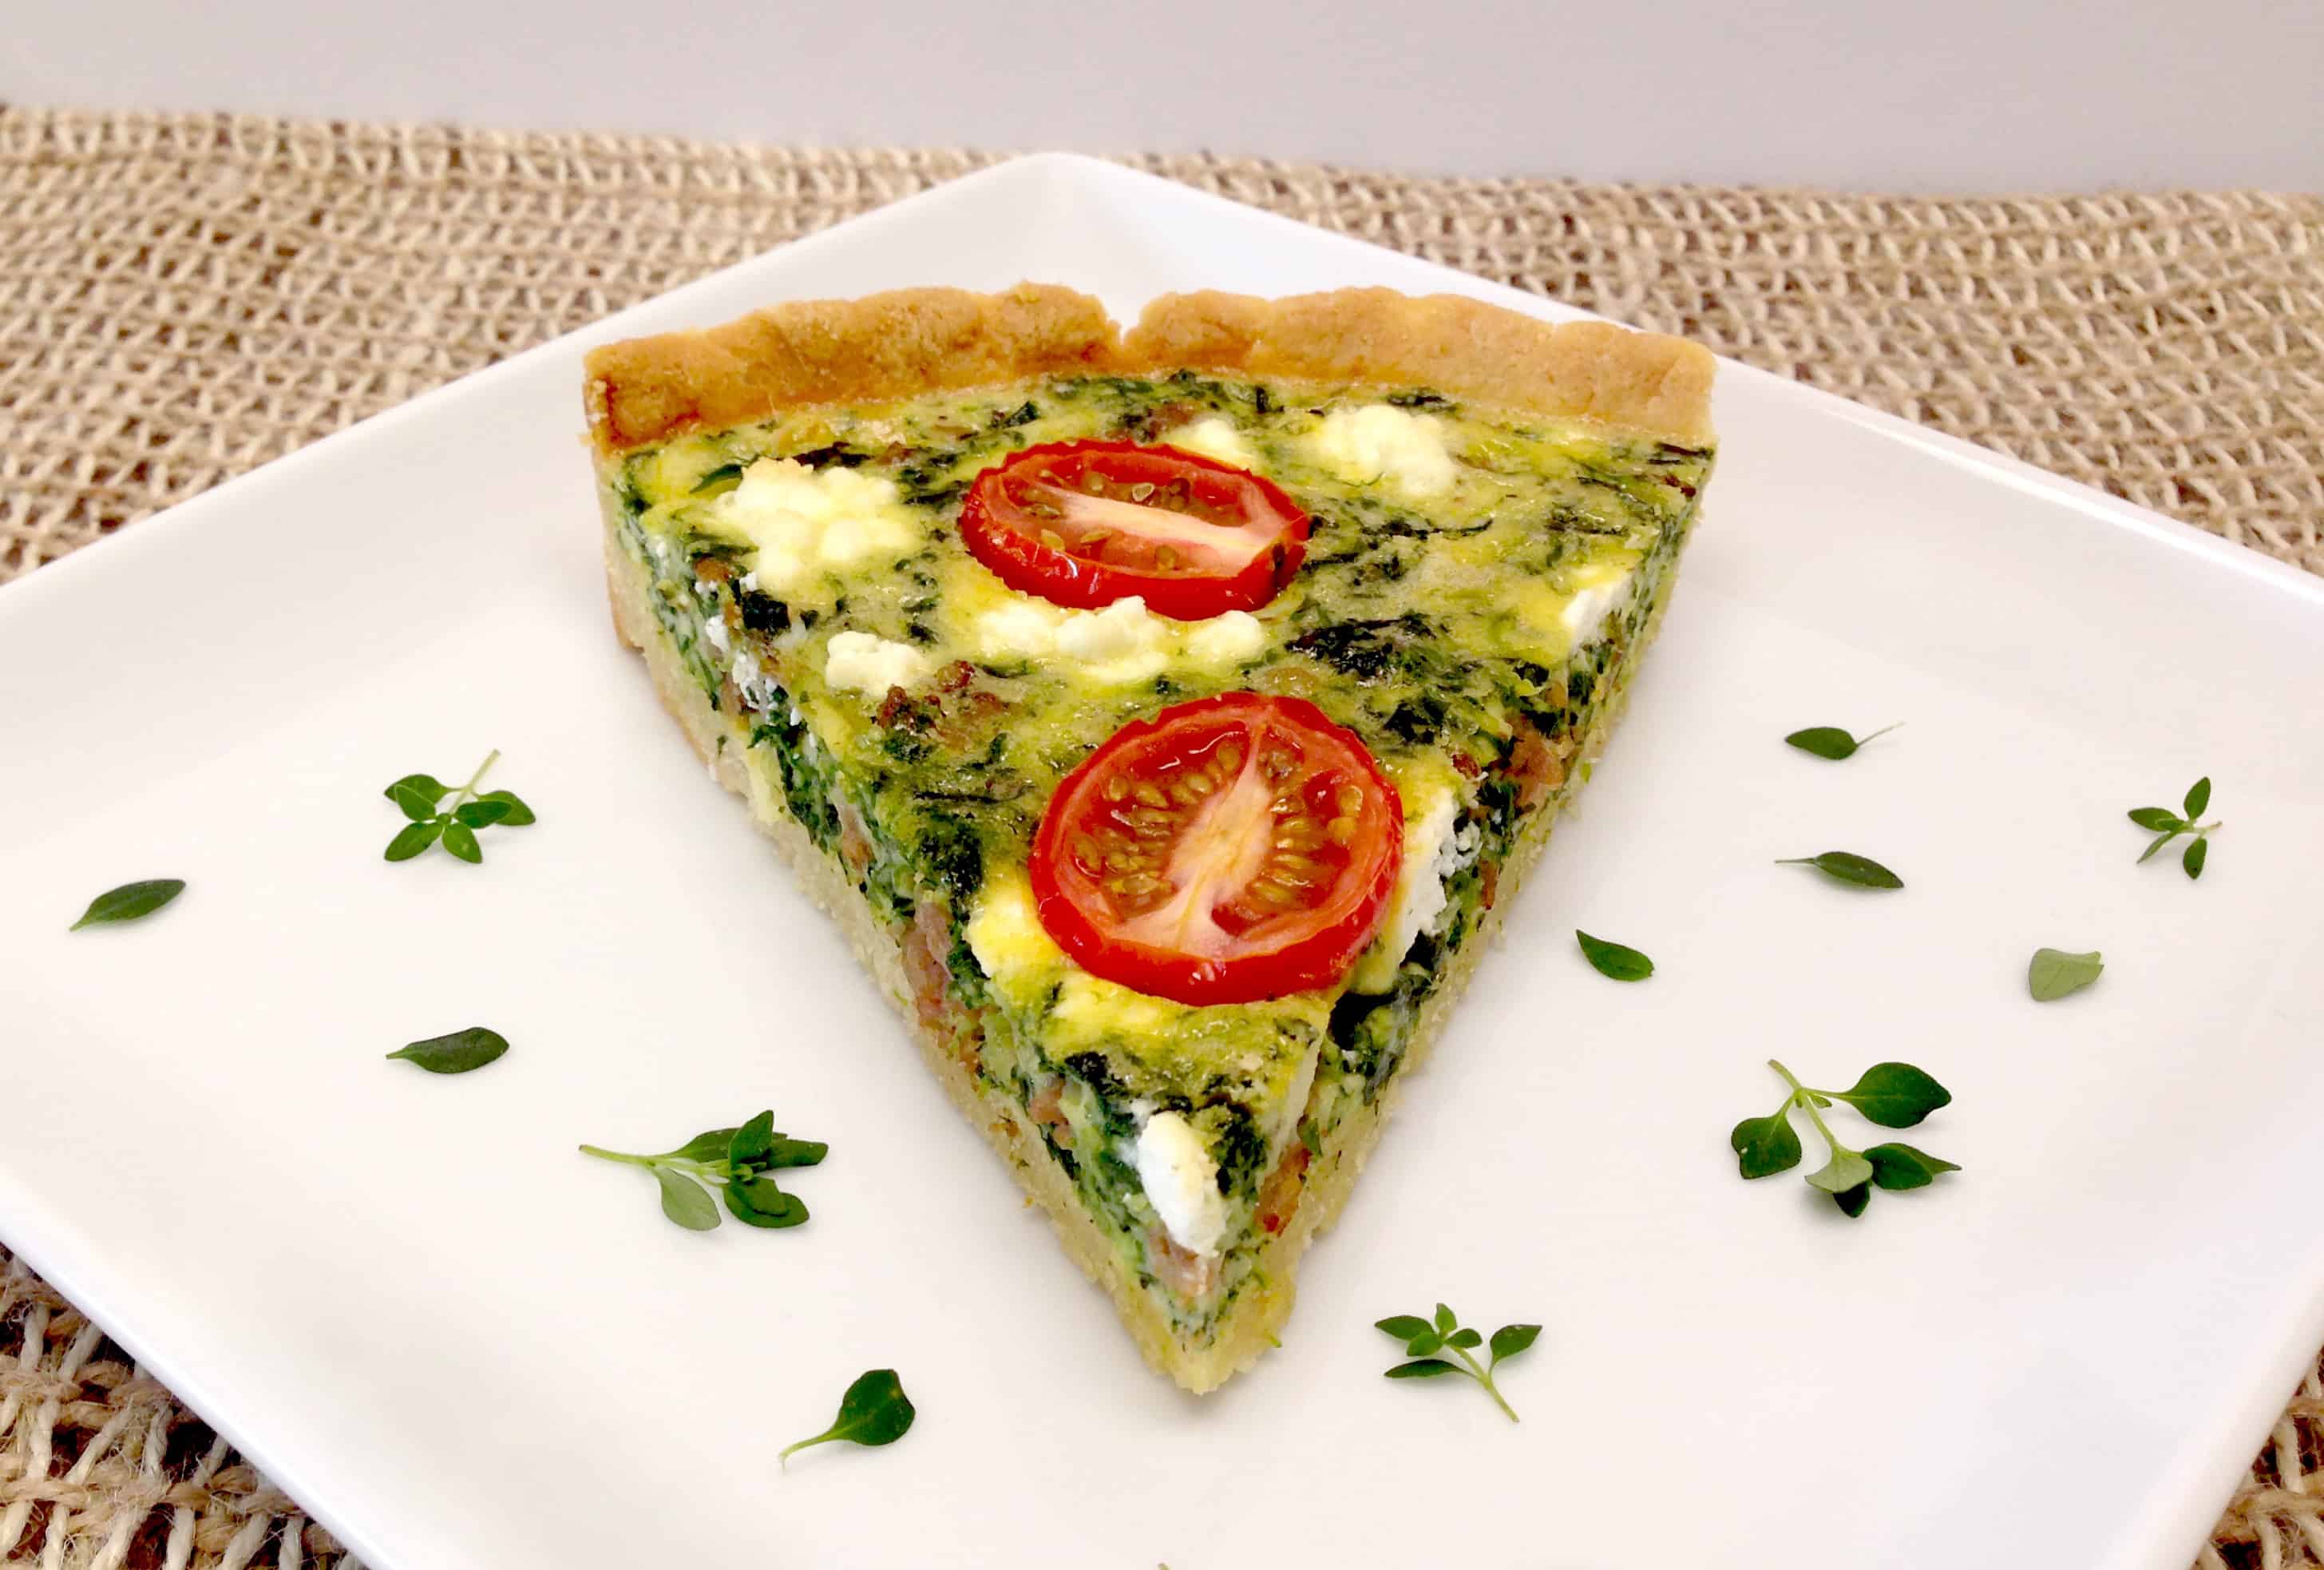 Sweet Italian Sausage and Spinach Quiche - Keto, Low Carb & Gluten Free